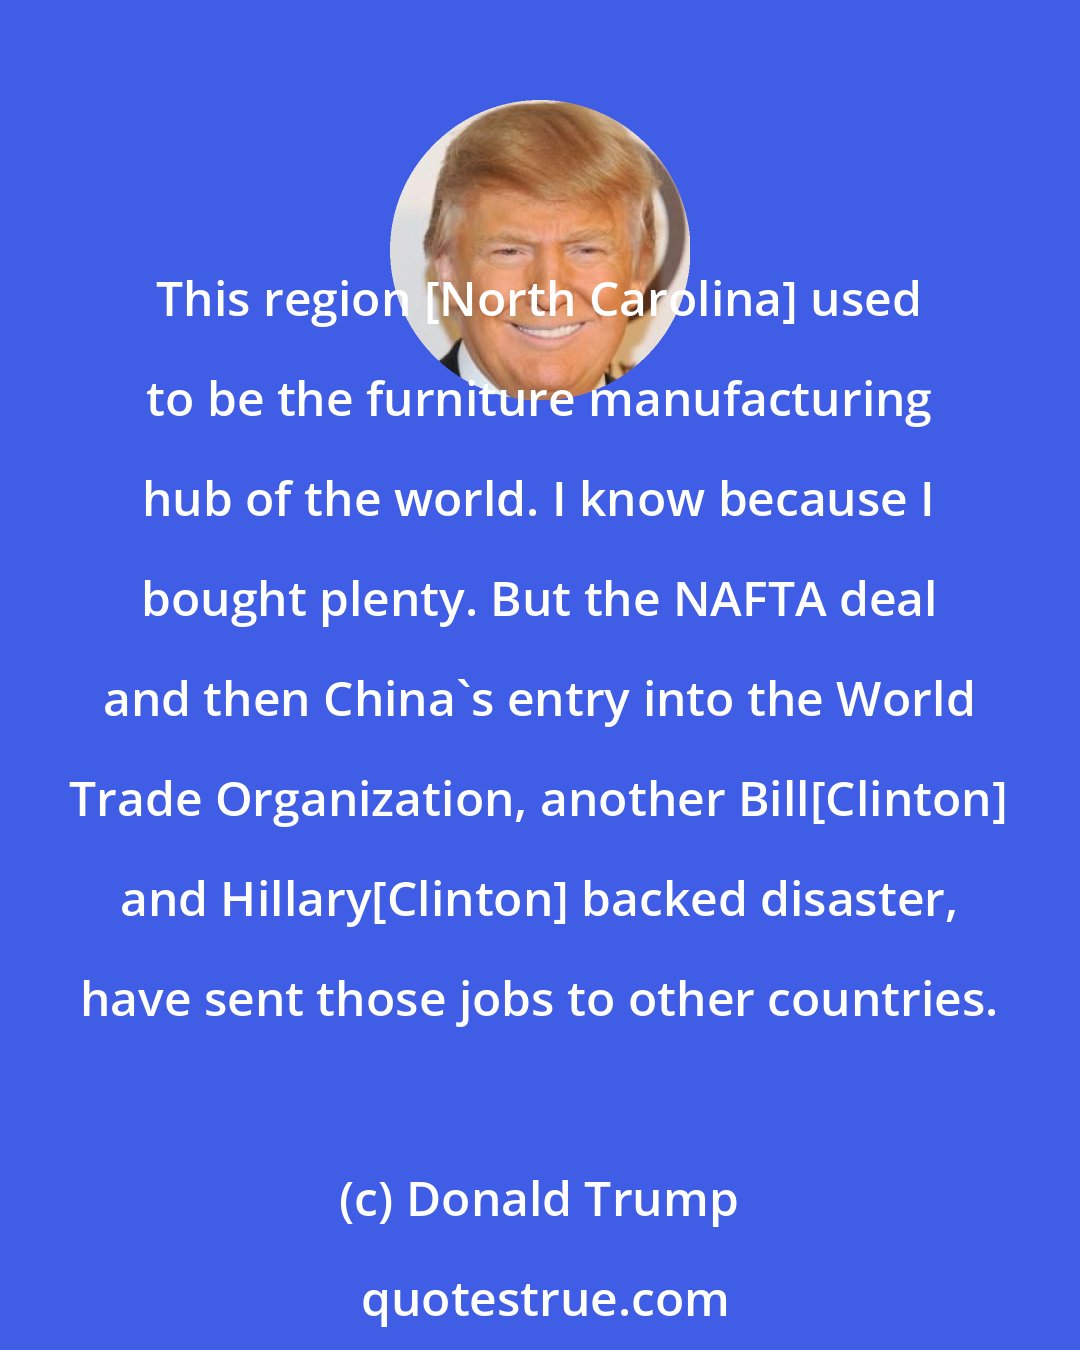 Donald Trump: This region [North Carolina] used to be the furniture manufacturing hub of the world. I know because I bought plenty. But the NAFTA deal and then China's entry into the World Trade Organization, another Bill[Clinton] and Hillary[Clinton] backed disaster, have sent those jobs to other countries.